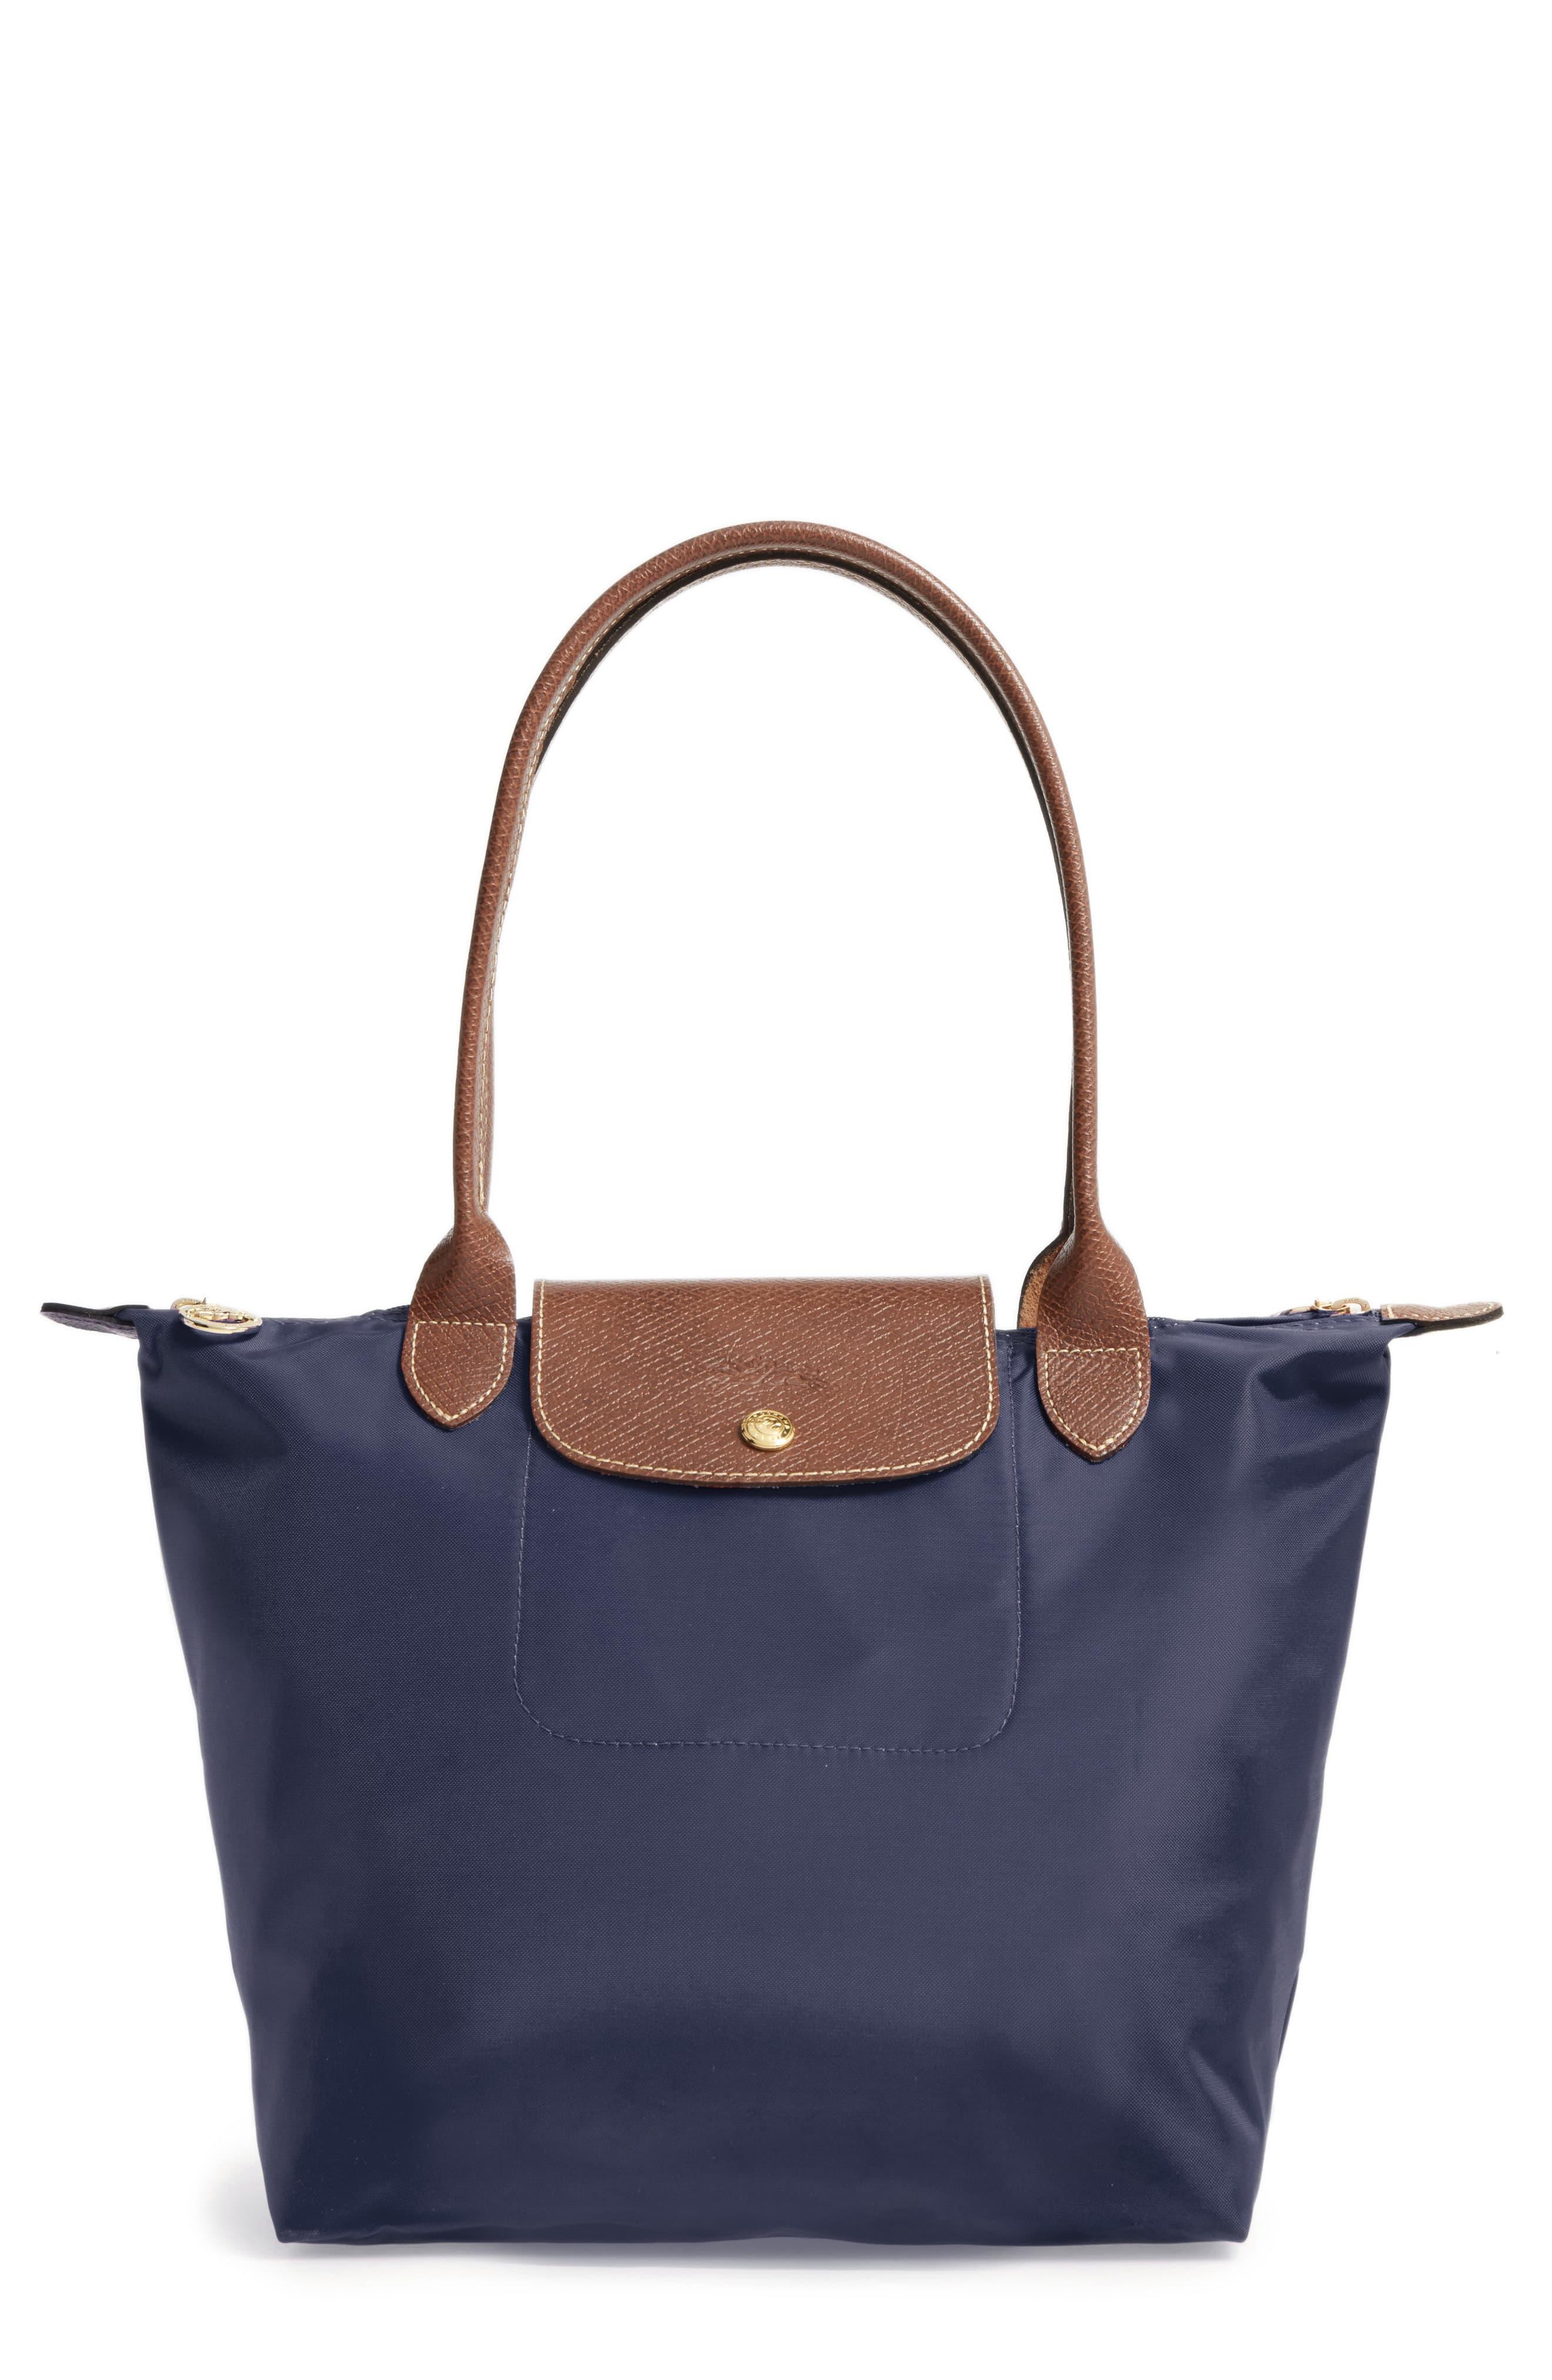 Longchamp Synthetic Small Le Pliage Nylon Shoulder Tote in Blue - Lyst